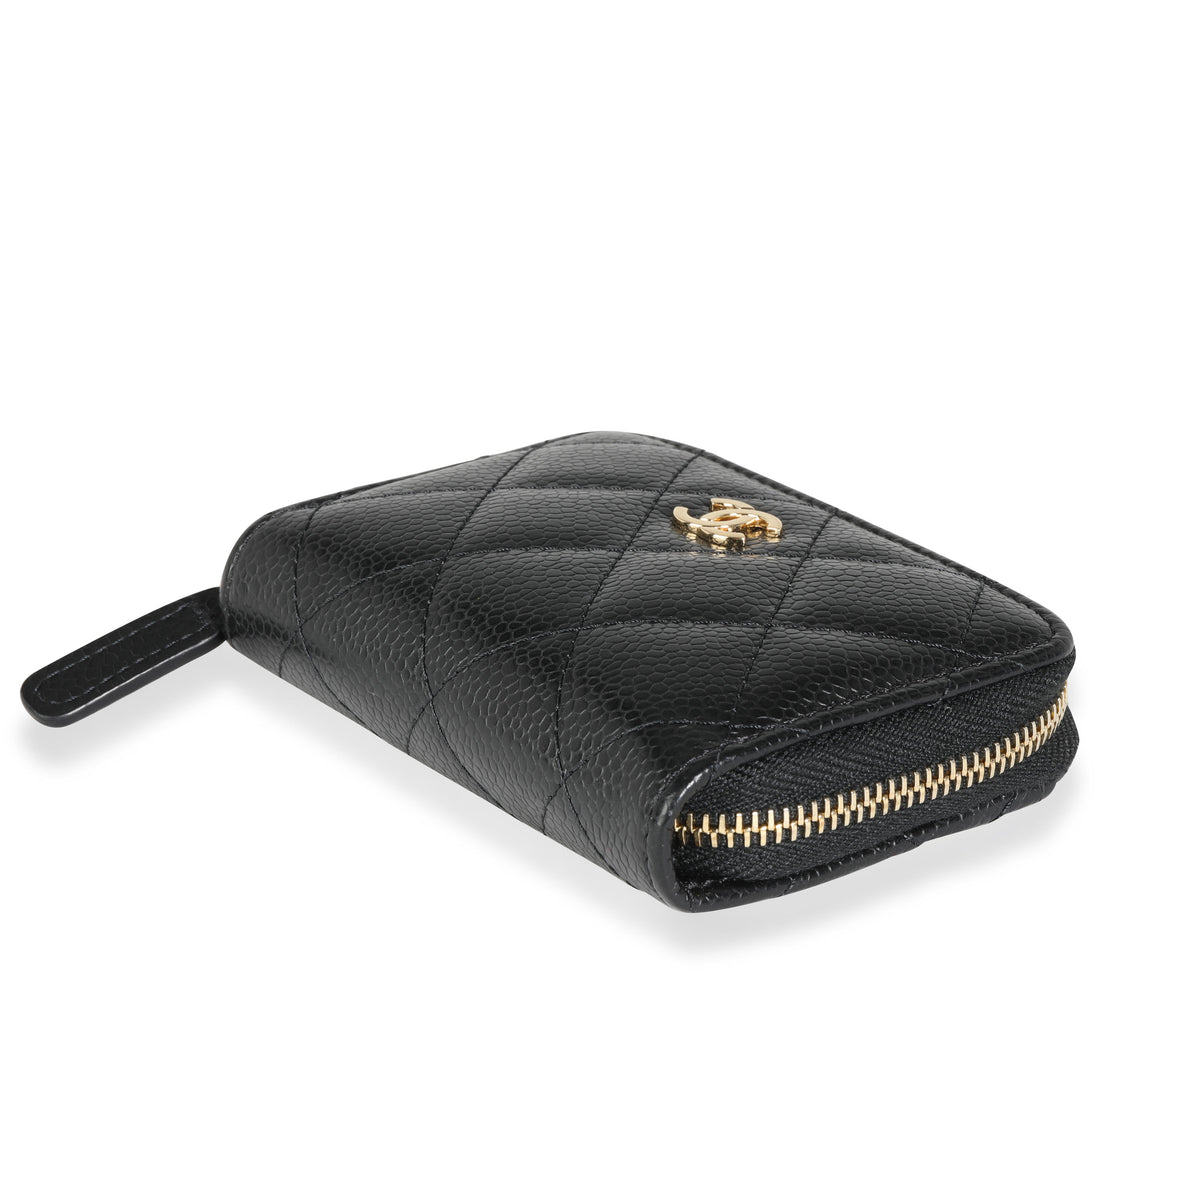 Chanel Classic Black Leather Zipped Coin Purse Wallet 